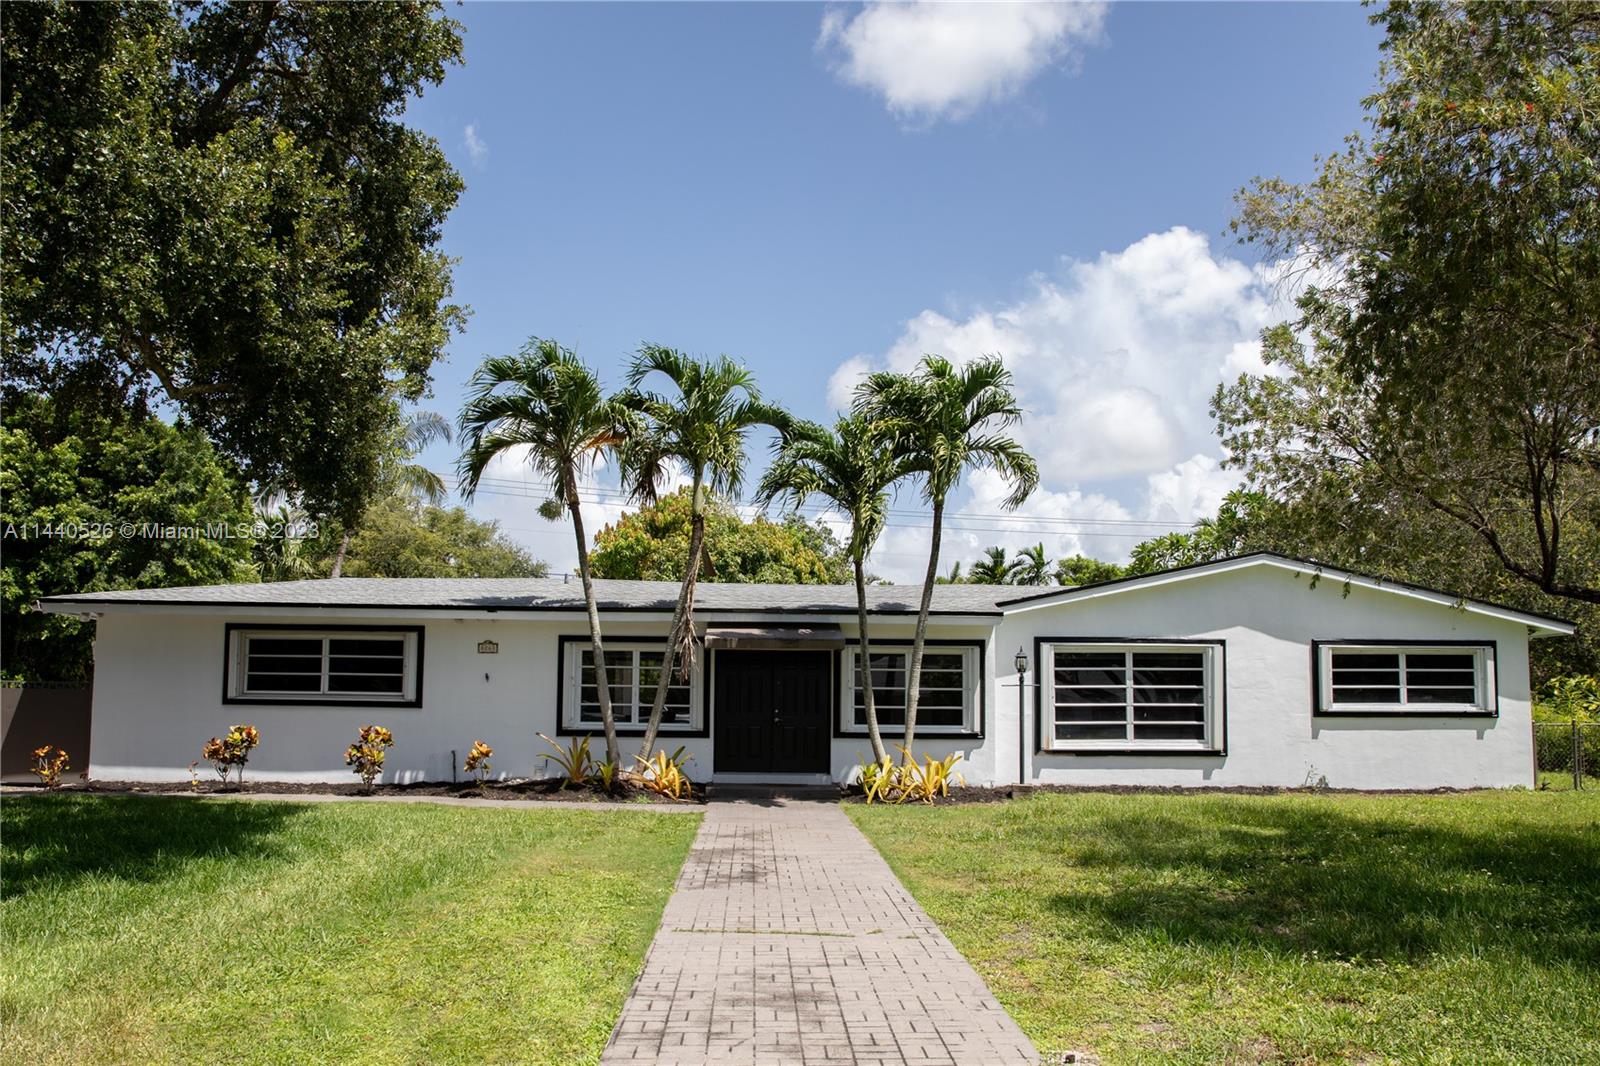 Amazing home in Palmetto Bay. 3 bed/2 baths, open kitchen, renovated with an amazing back yard. A must see. All information is approximate and not warranted or guaranteed.